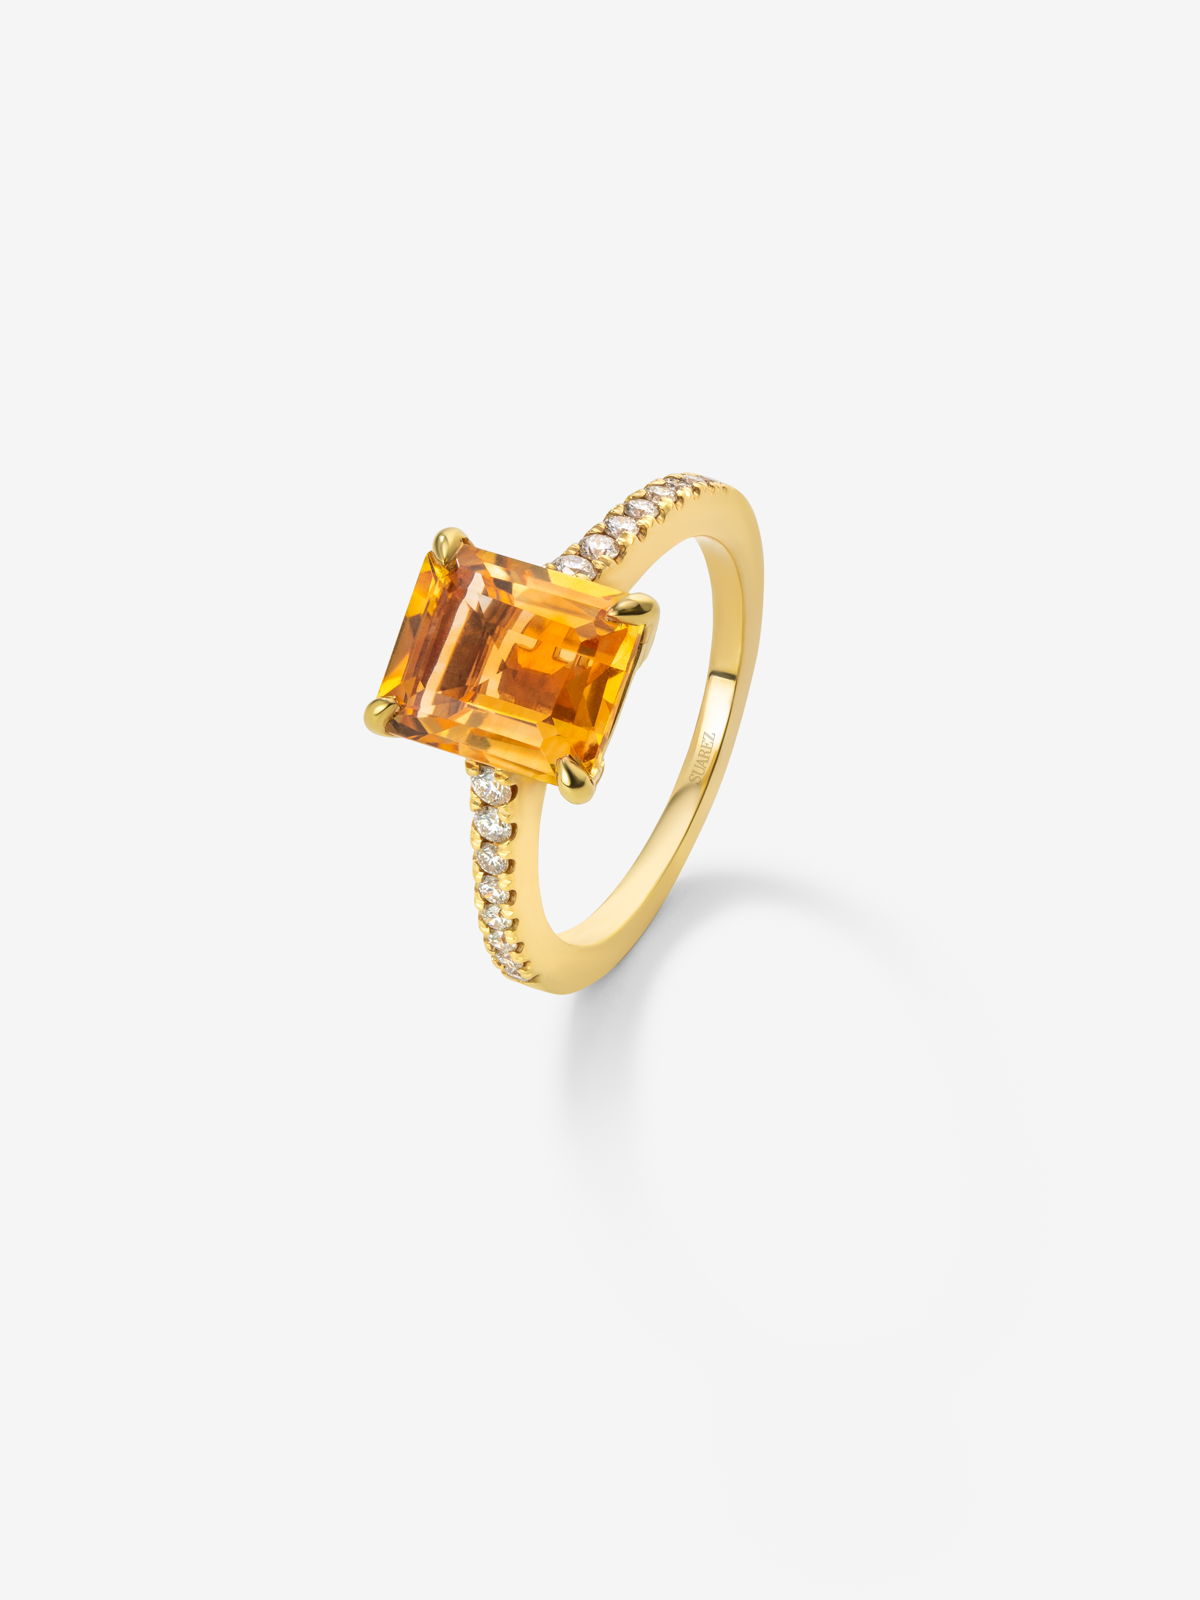 18K yellow gold ring with citrine and diamond